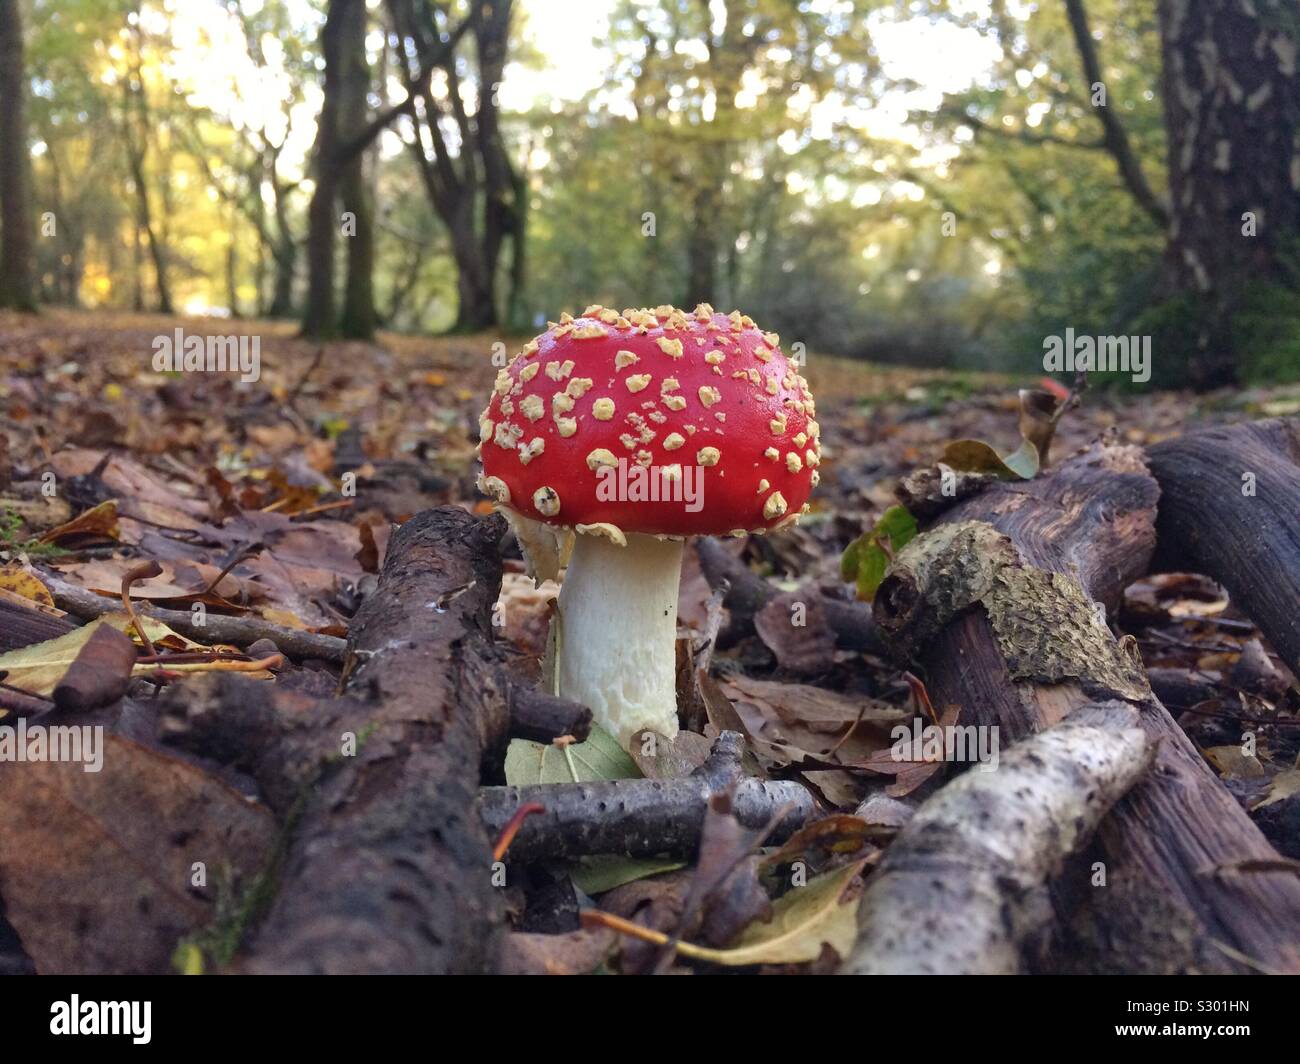 A young fly agaric mushroom on the forest floor Stock Photo